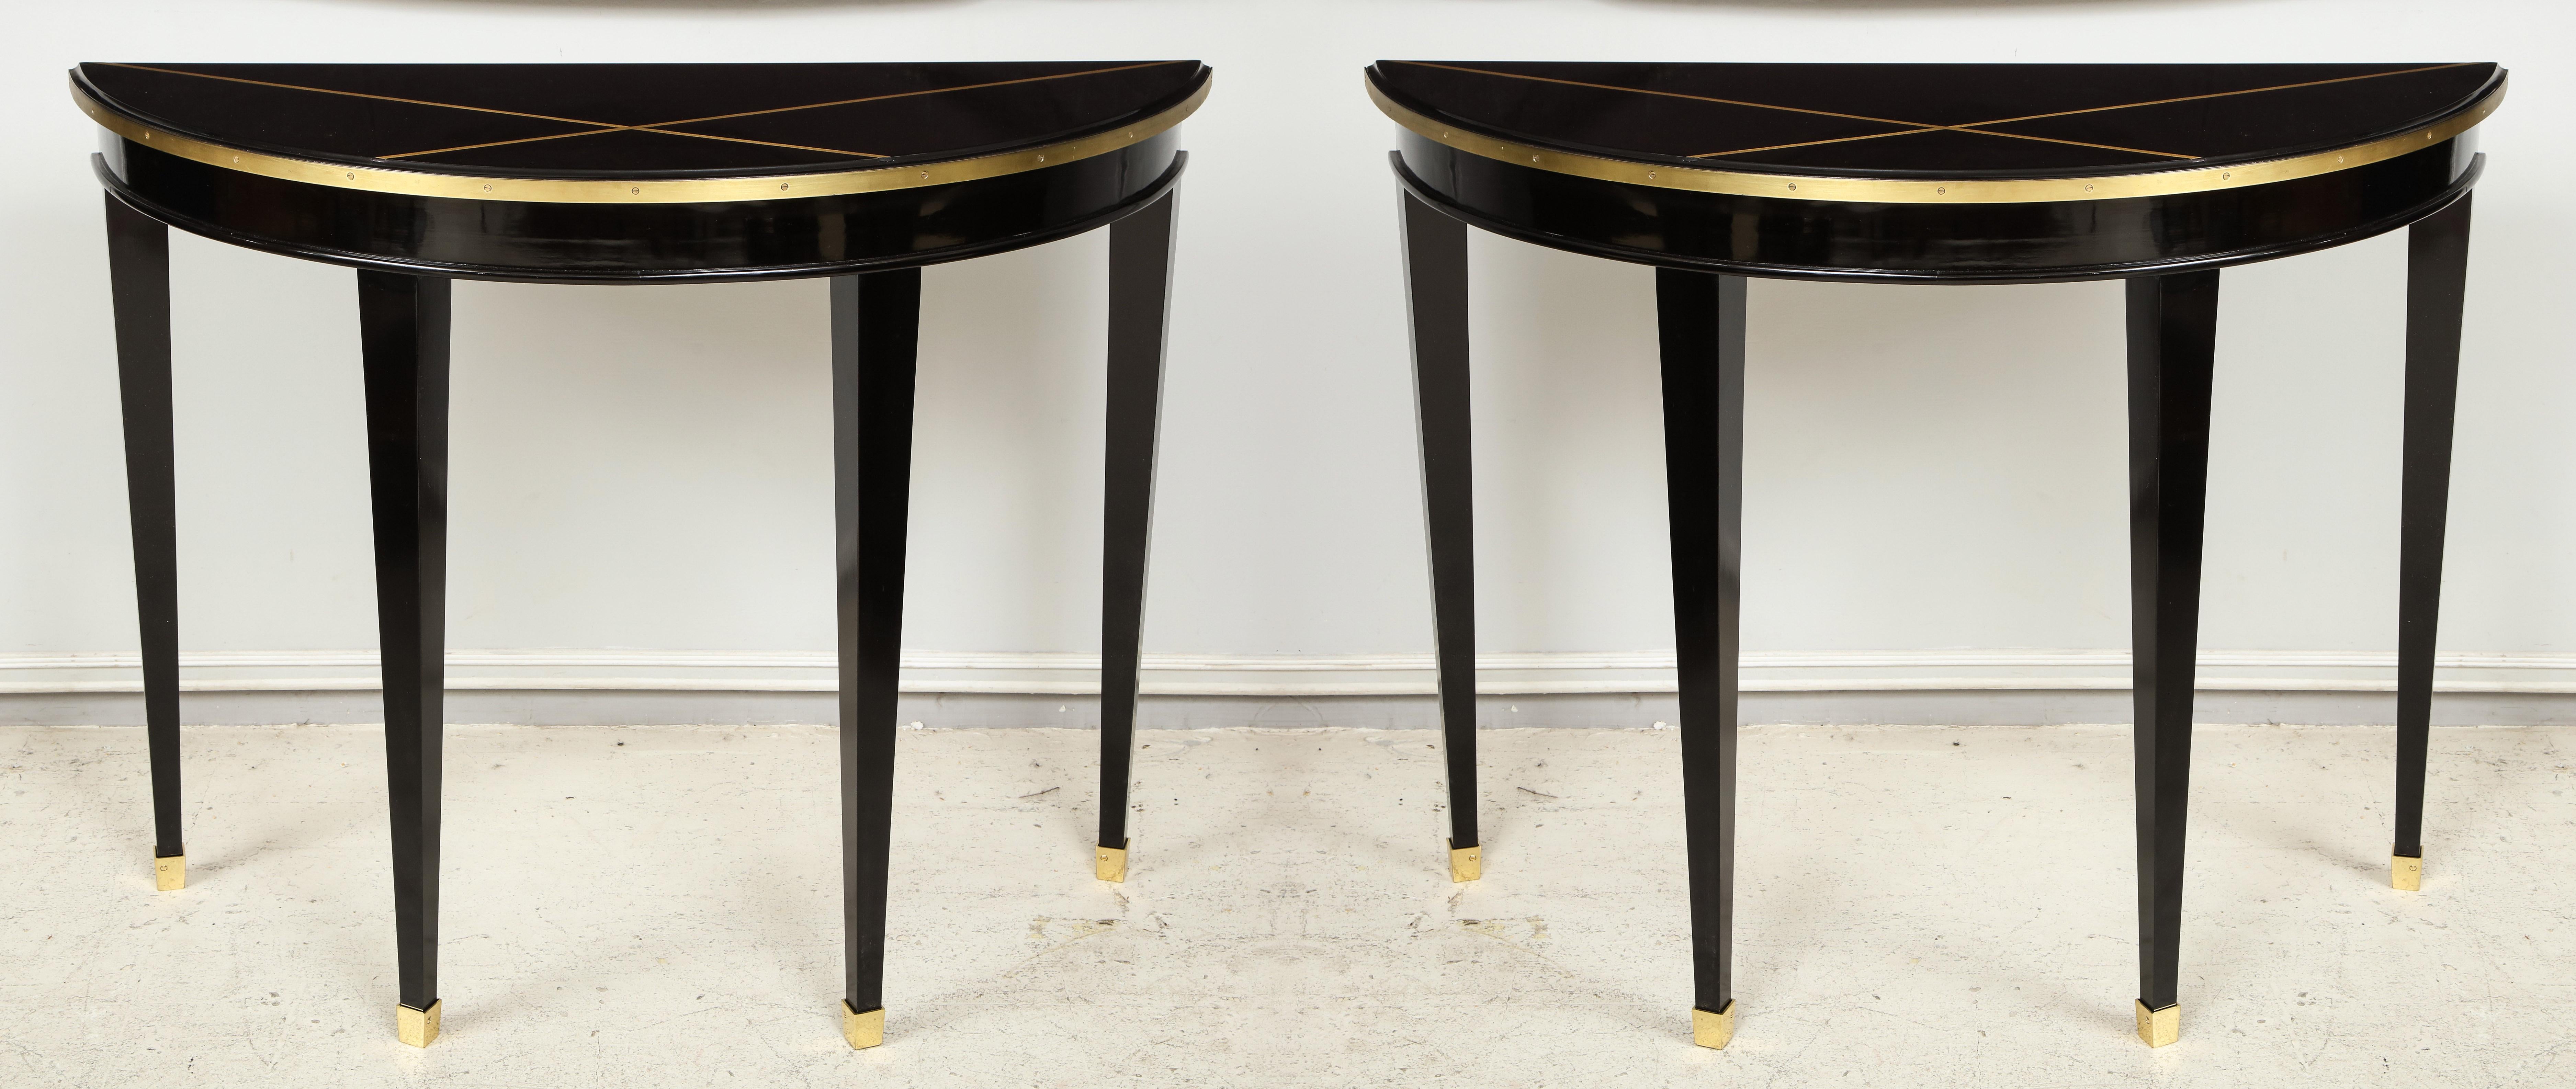 Custom pair of ebonized demilune consoles with inlaid brass top decoration on tapered legs ending in bronze sabots. These consoles can be customized to your specifications with a lead time of 8-10 weeks.